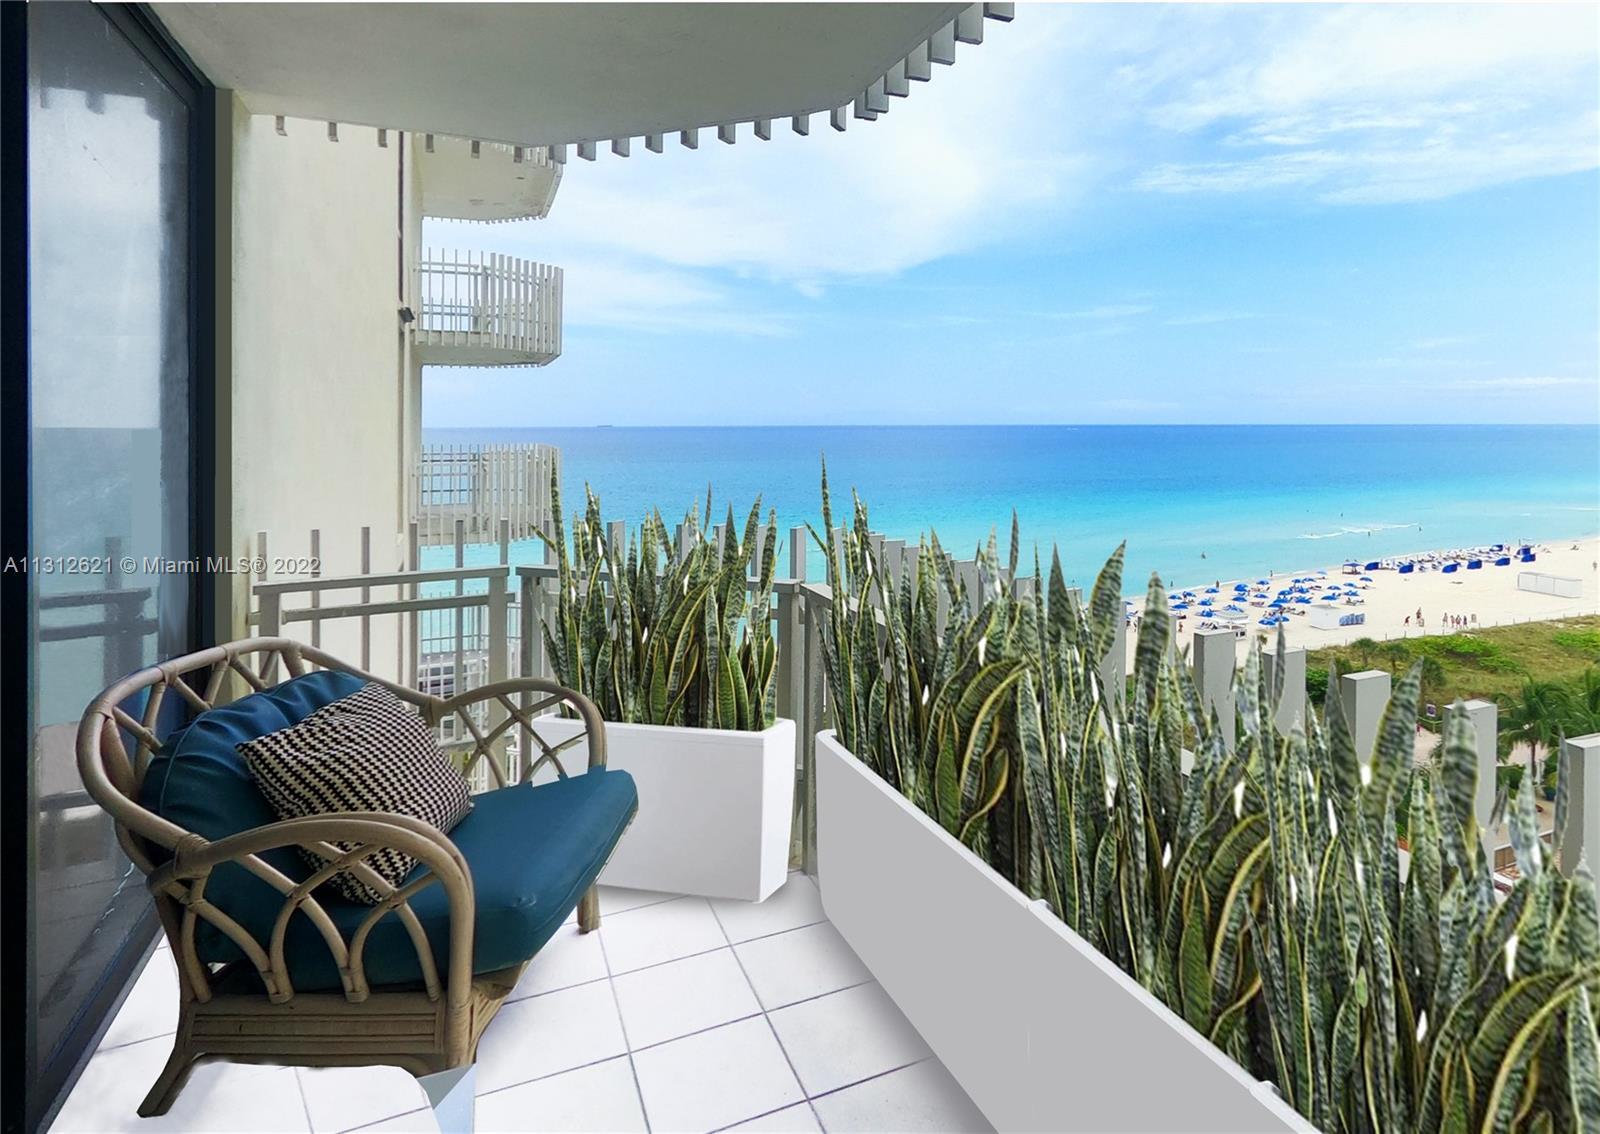 Newly Renovated Serene Oceanfront 2bd/1.5ba featuring some of the most exquisite finishes: an open c